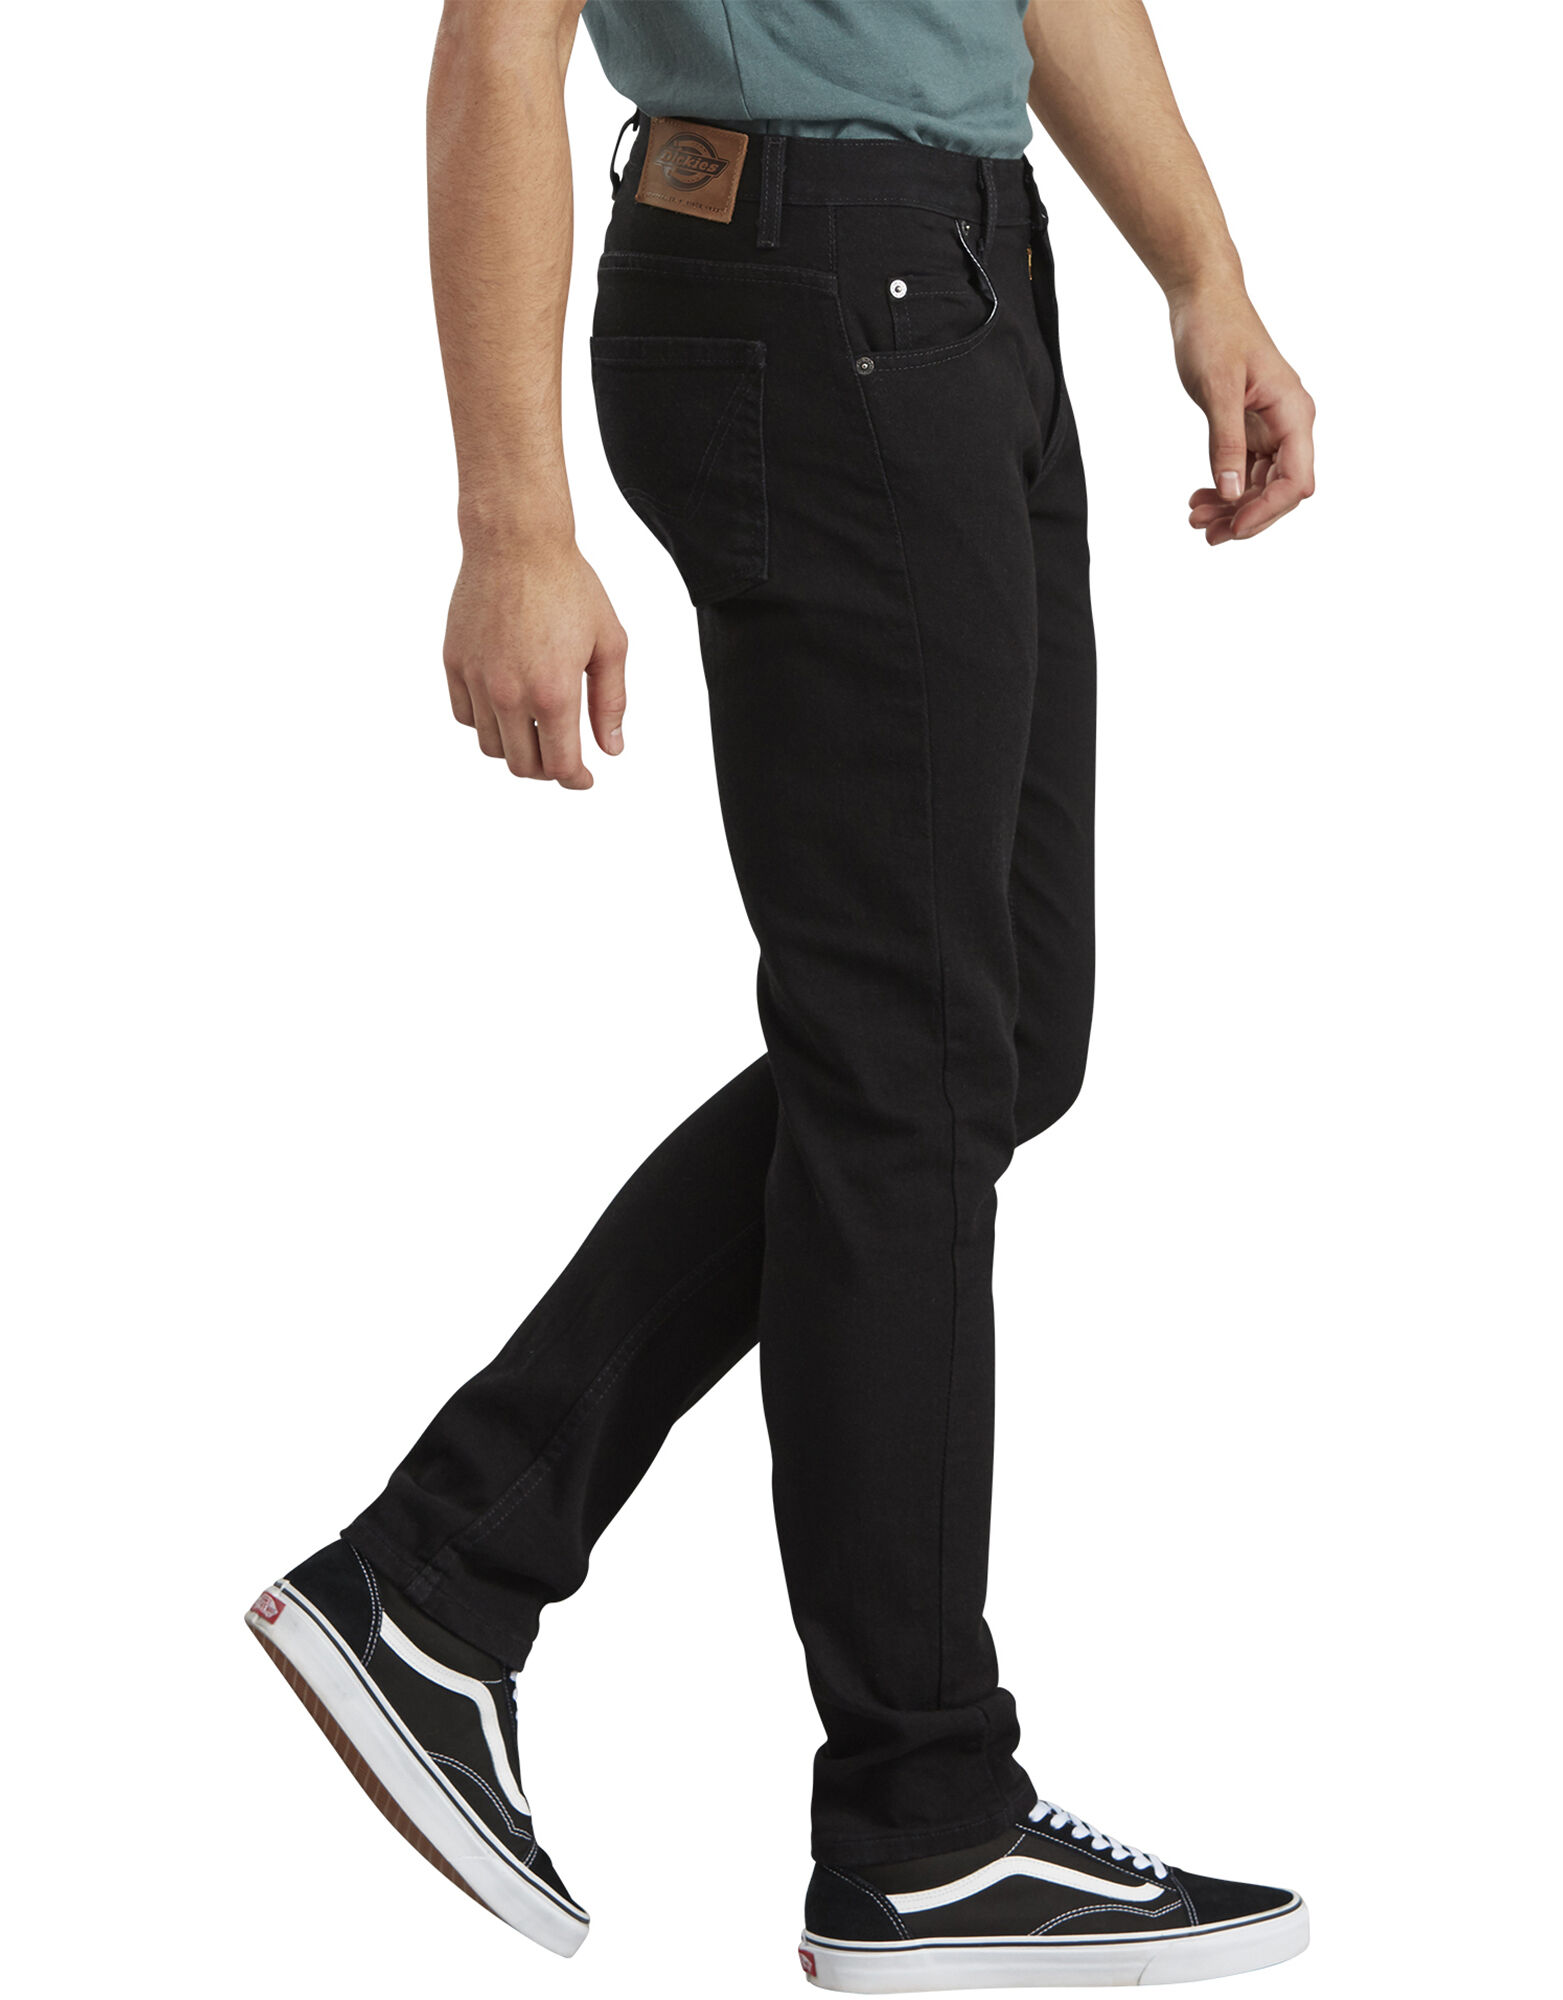 Stretch Skinny Jeans for Men | Dickies